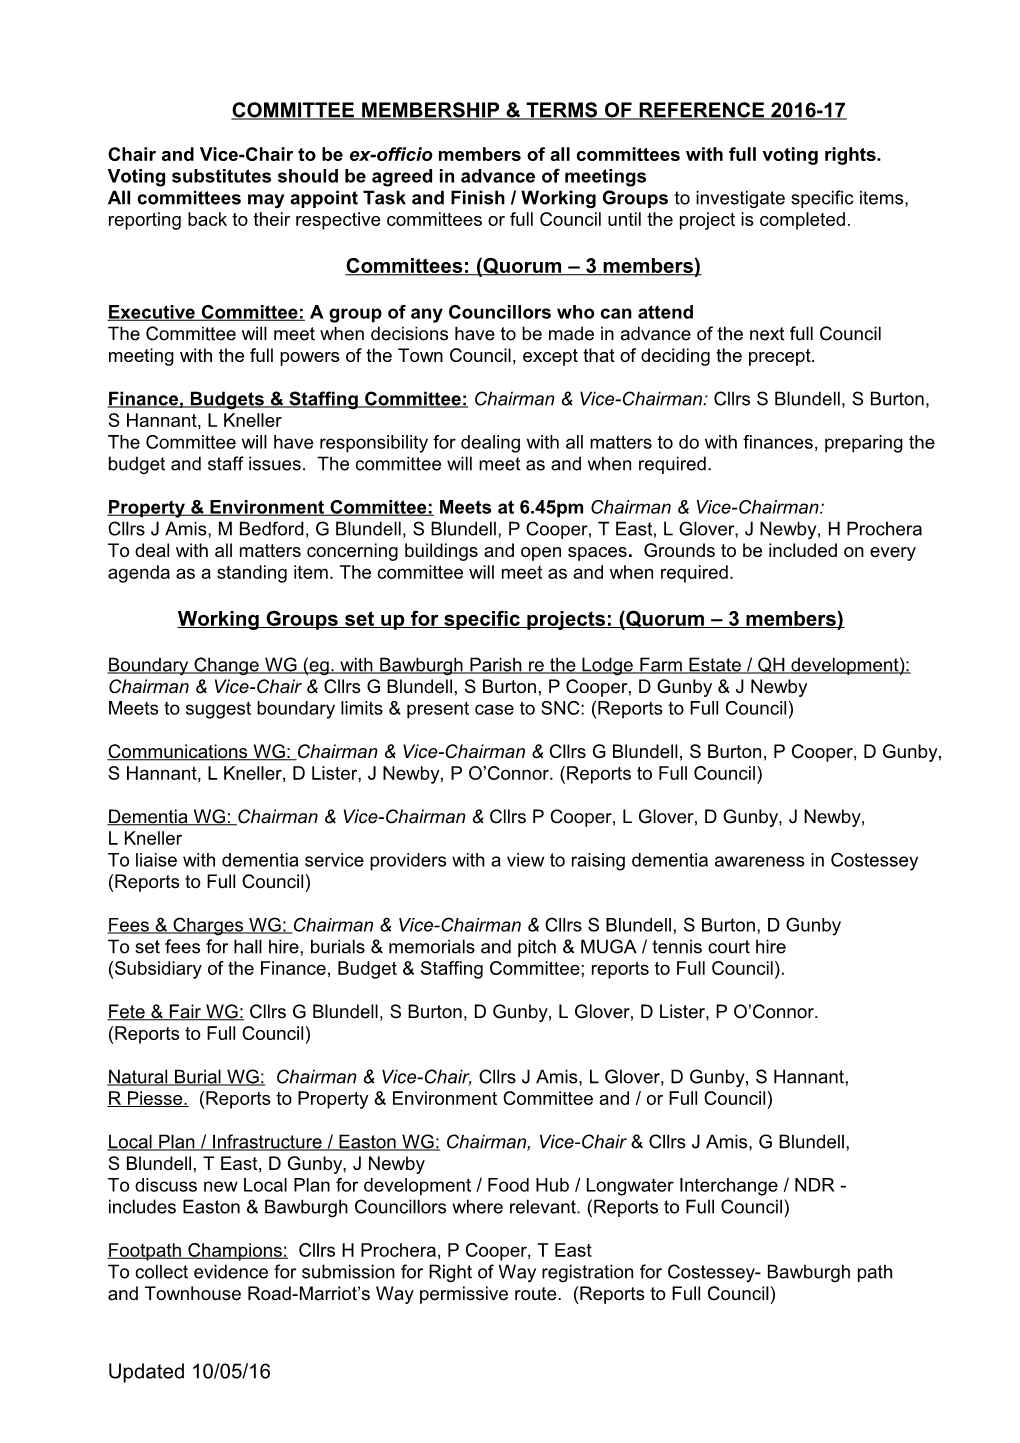 Committee Membership 2011-2012 and Terms of Reference